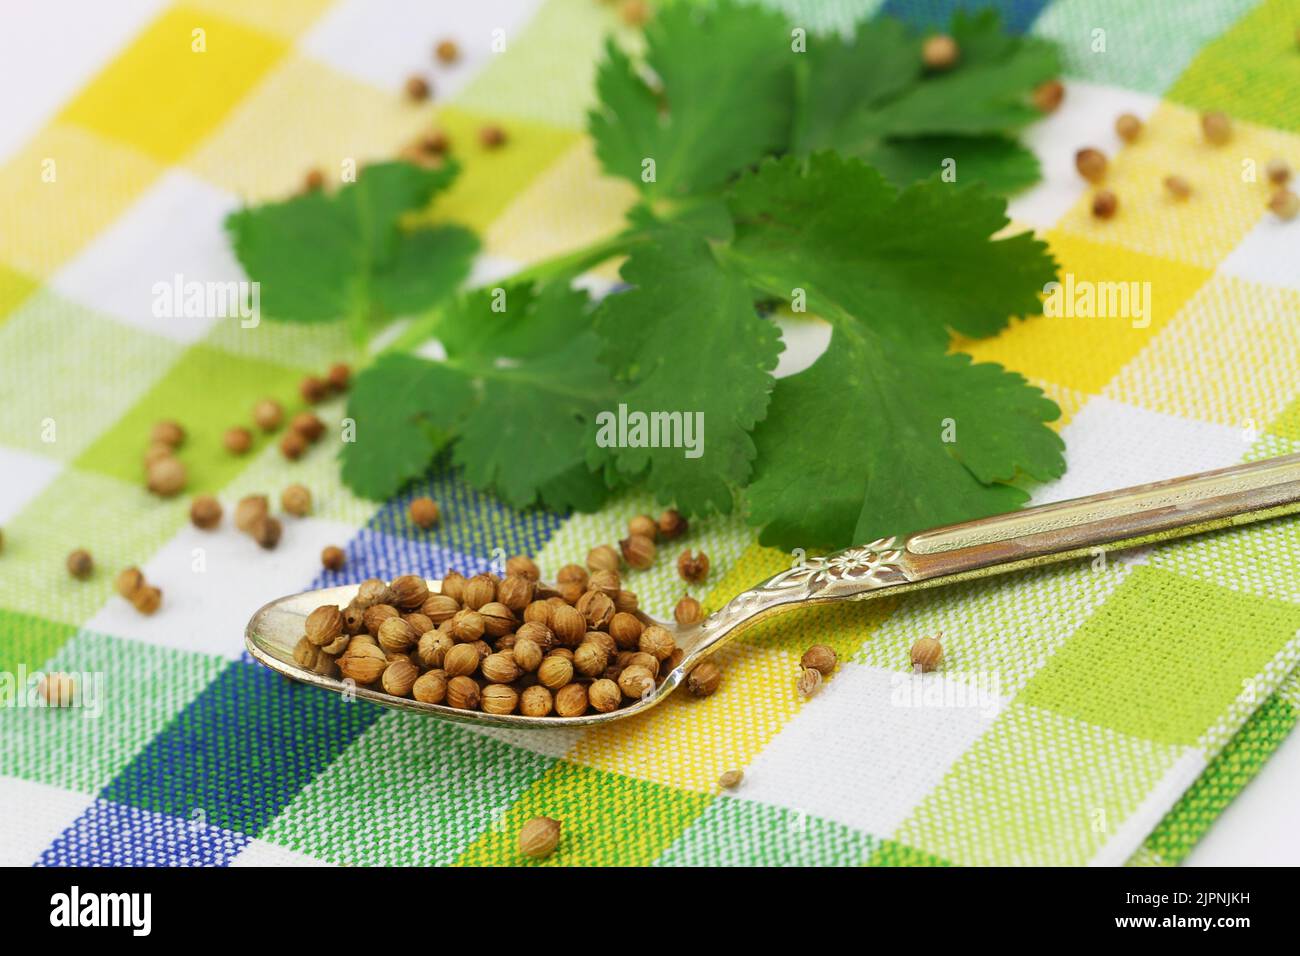 Coriander seeds on silver spoon and fresh coriander leaves on colorful checkered kitchen cloth Stock Photo